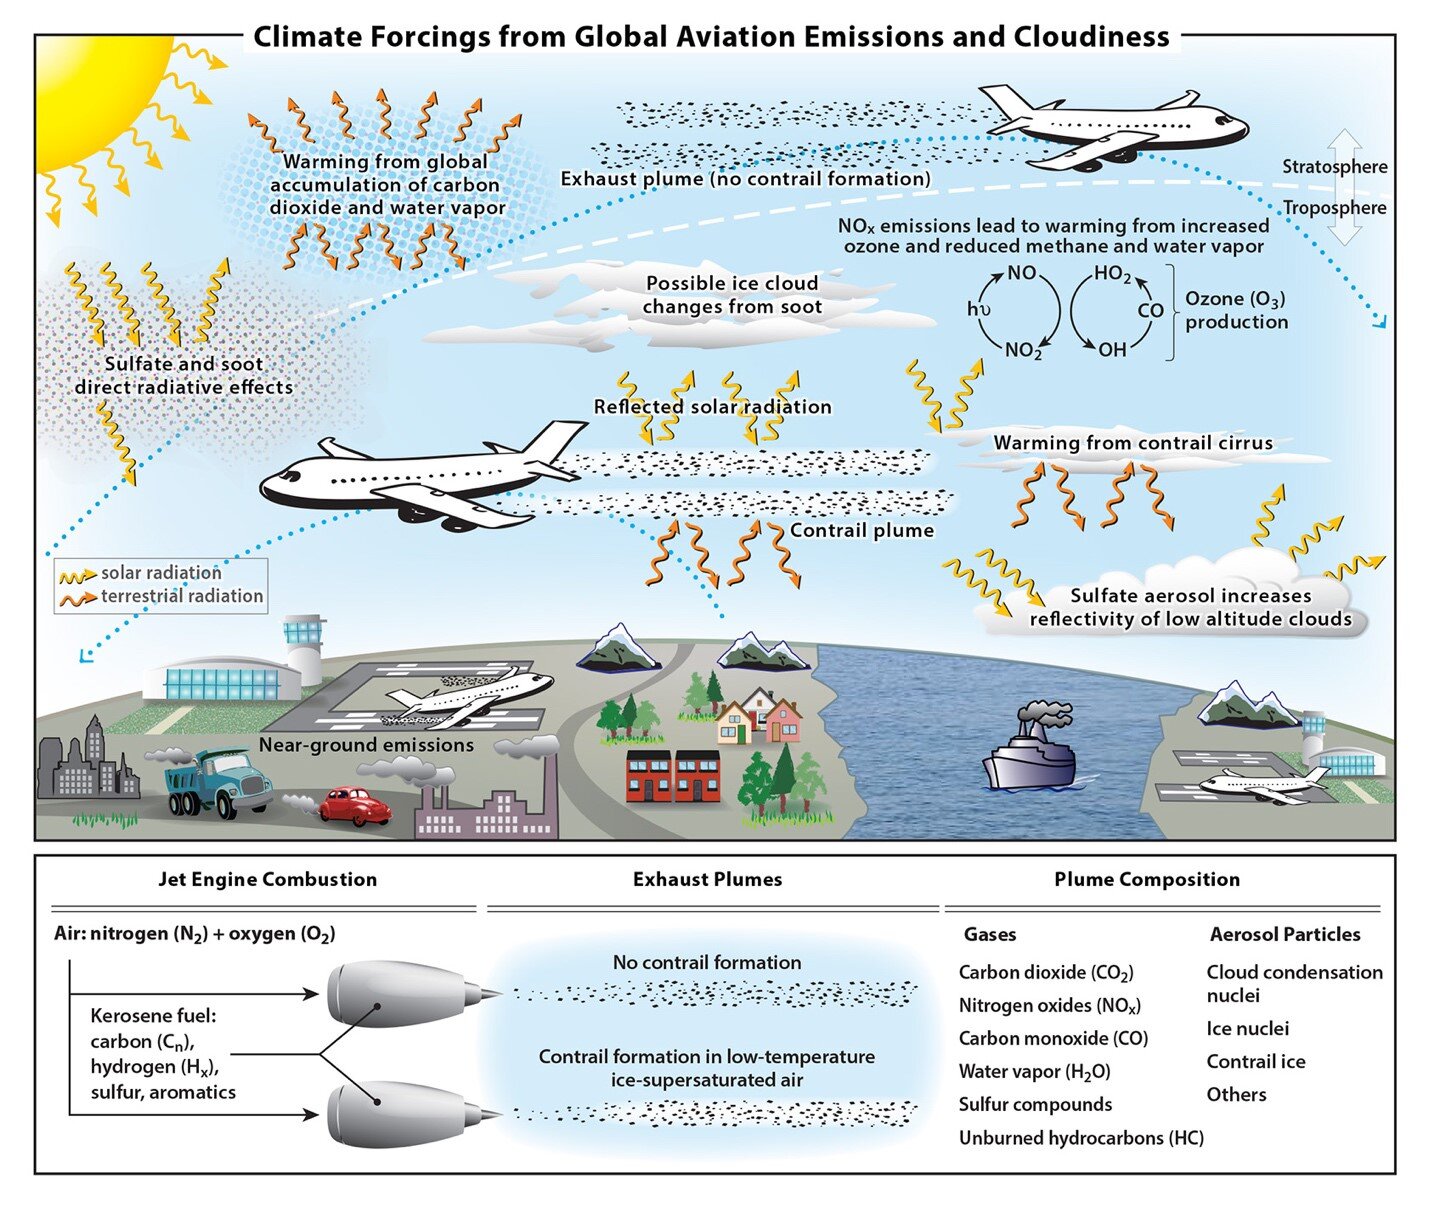 Aviation contributes 3.5% to the drivers of climate change that stem from humans - Phys.org